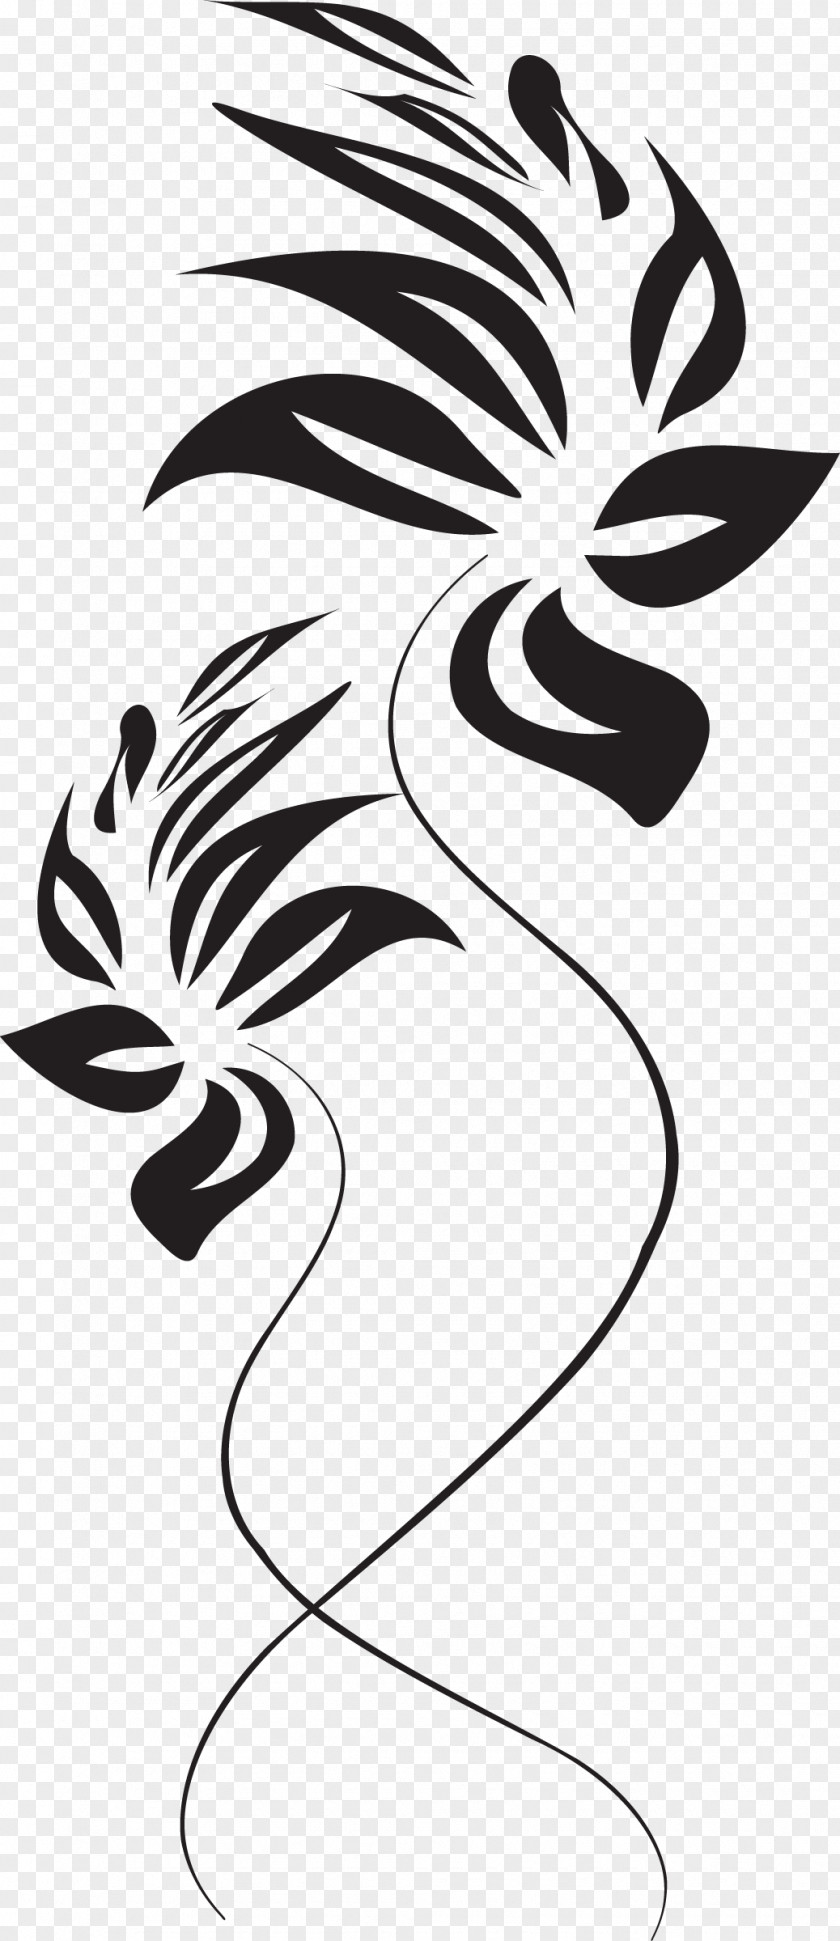 Plant Visual Arts Black And White Clip Art PNG